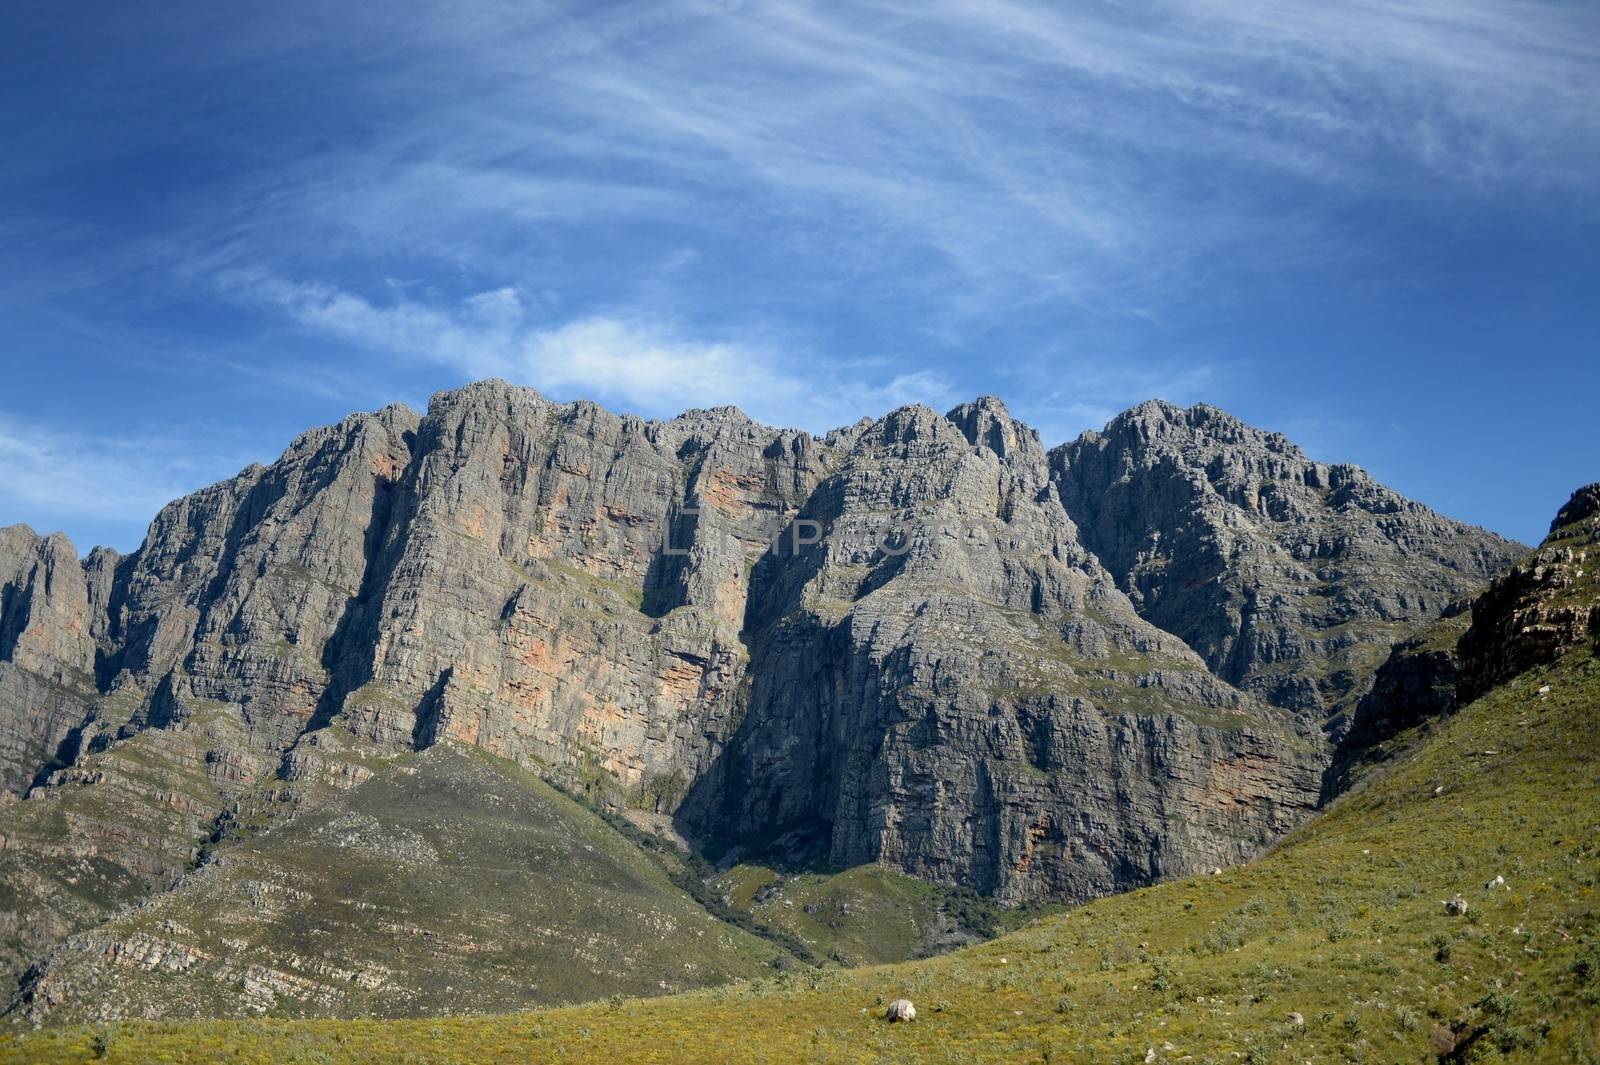 A scenic shot of the Montagu mountain ranges